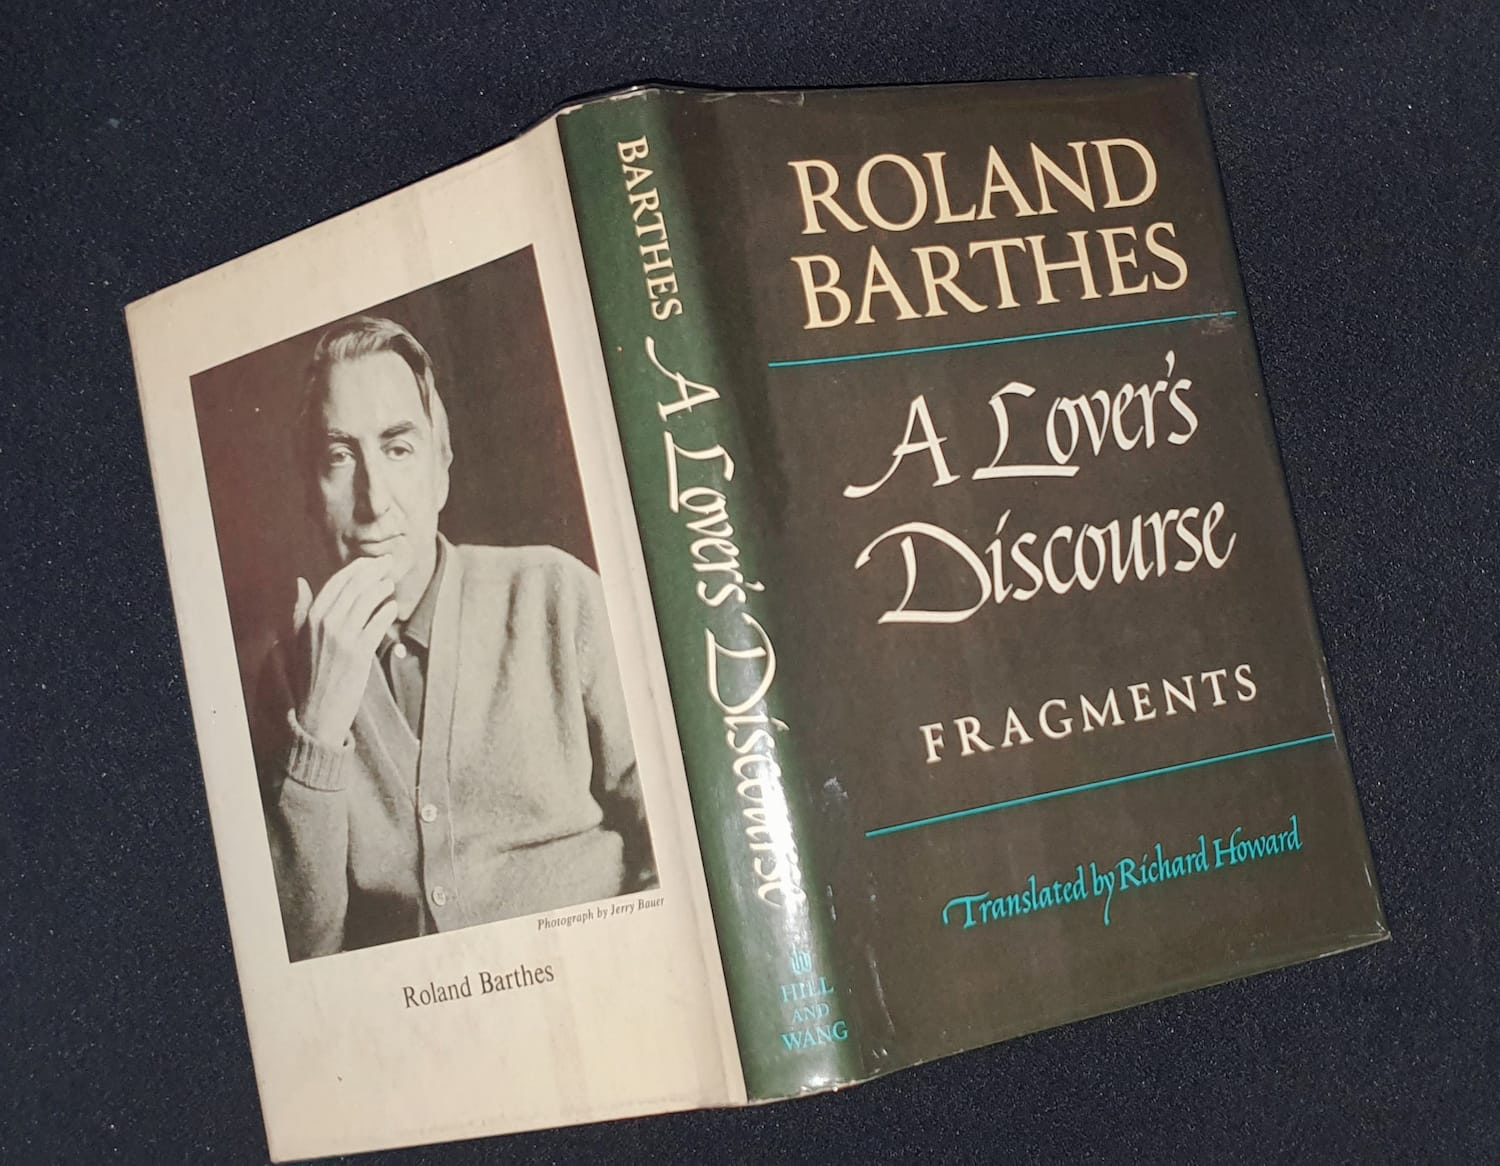 Hardcover copy of A Lover’s Discourse, featuring portrait of Barthes on the back